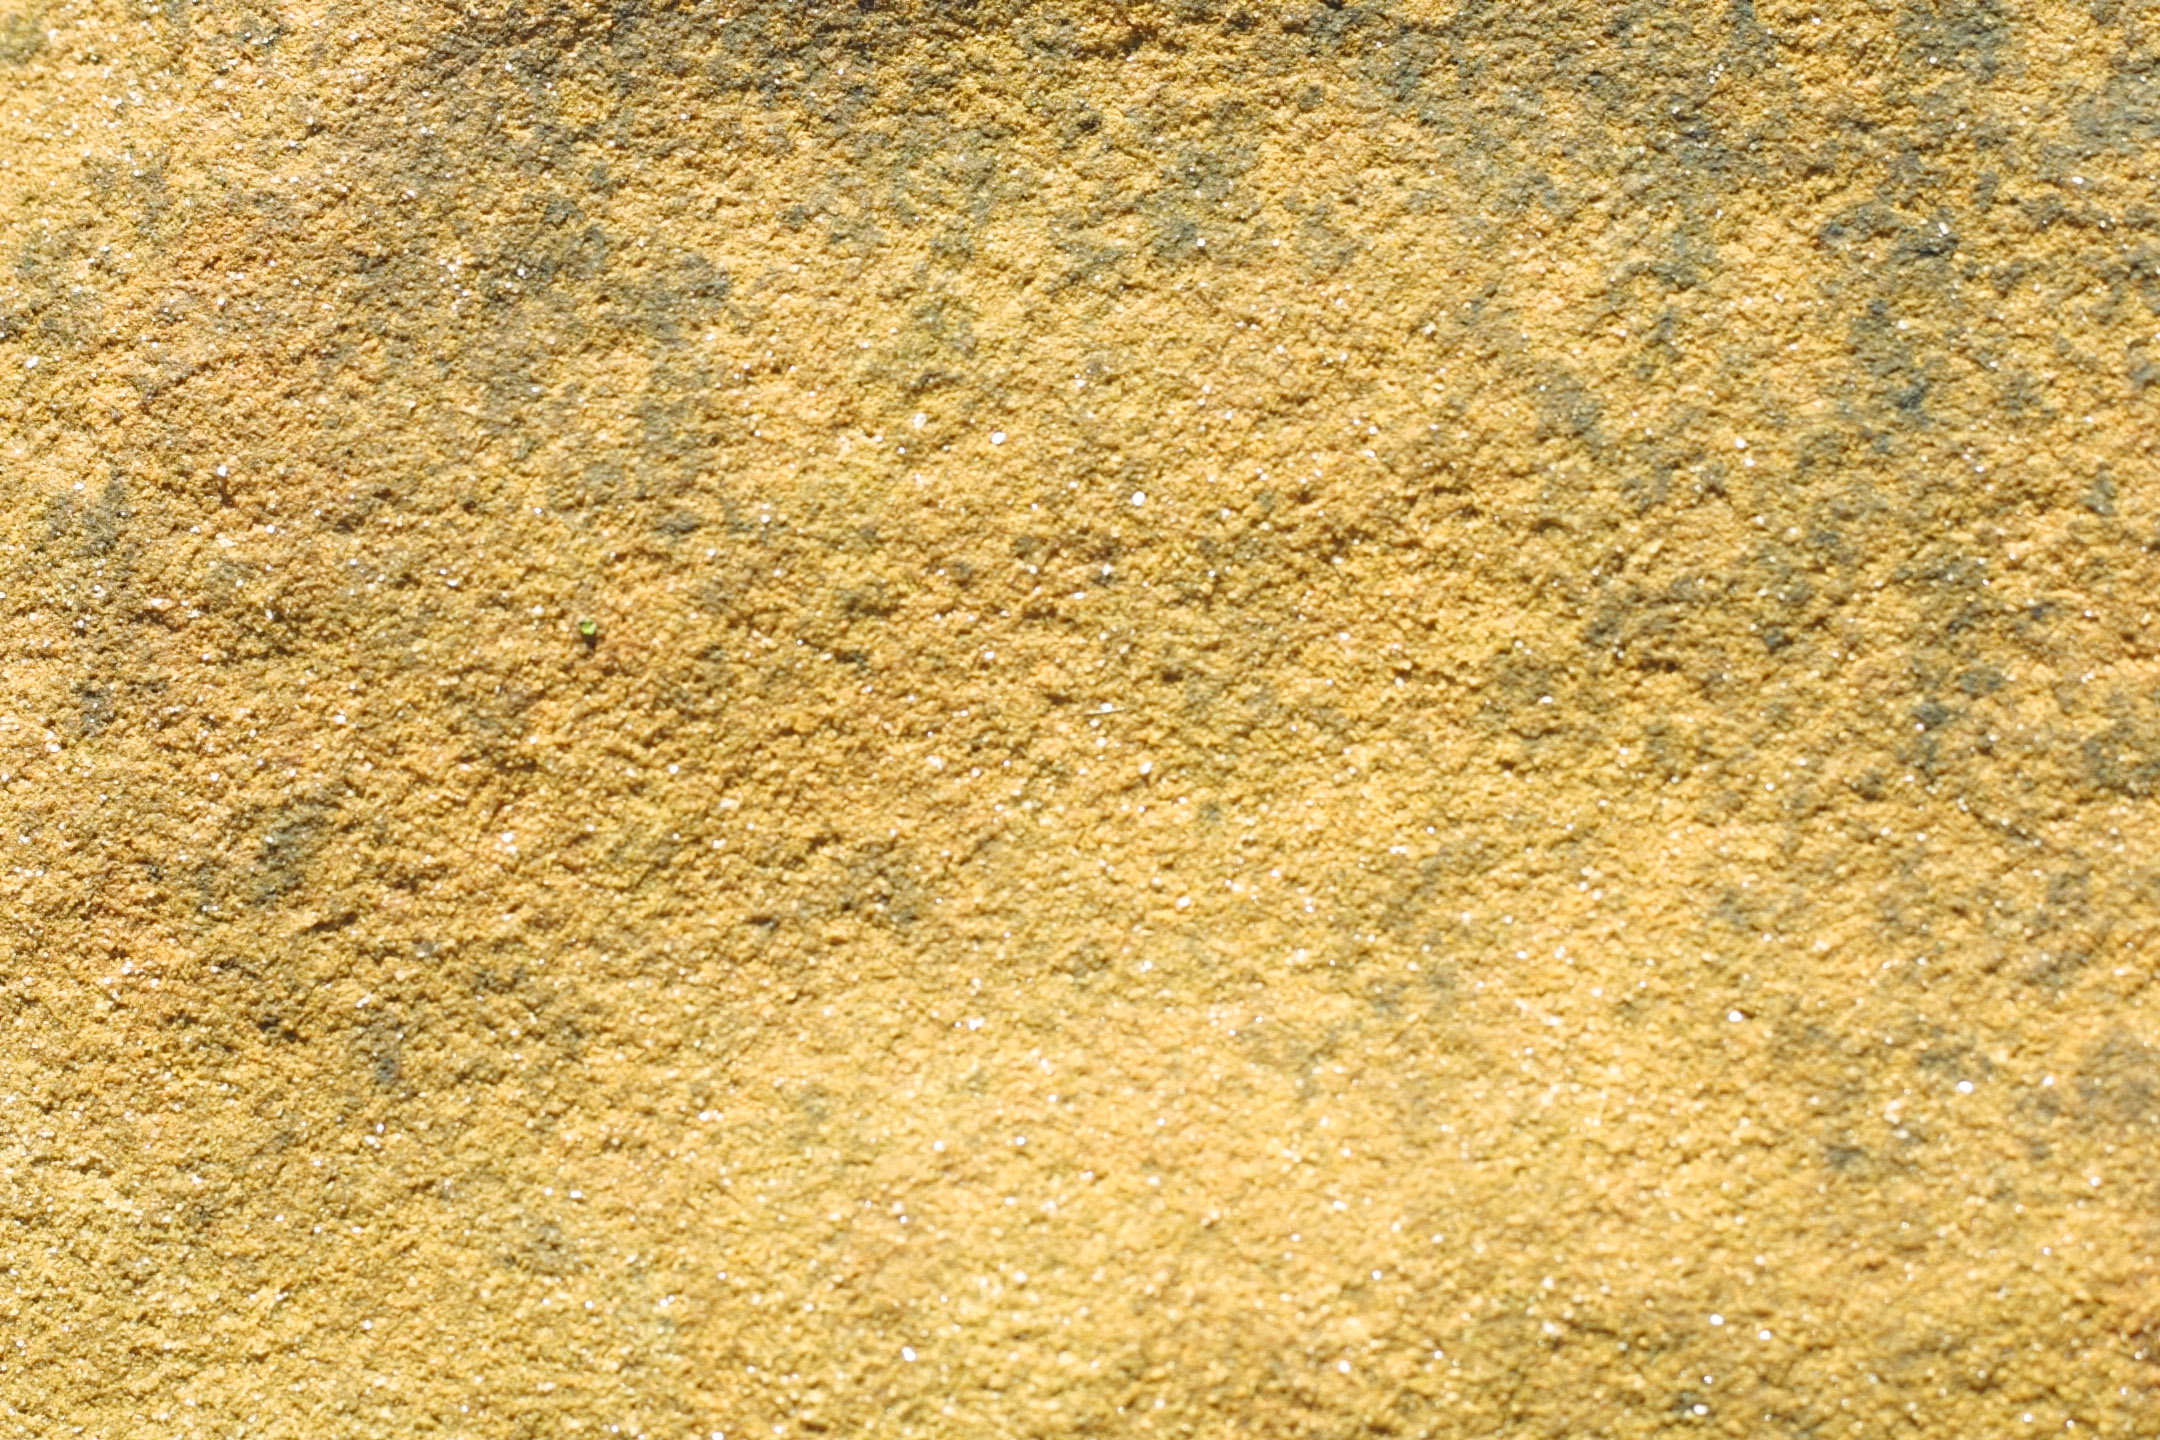 Sand Stone Texture Group Picture Image By Tag Keywordpictures